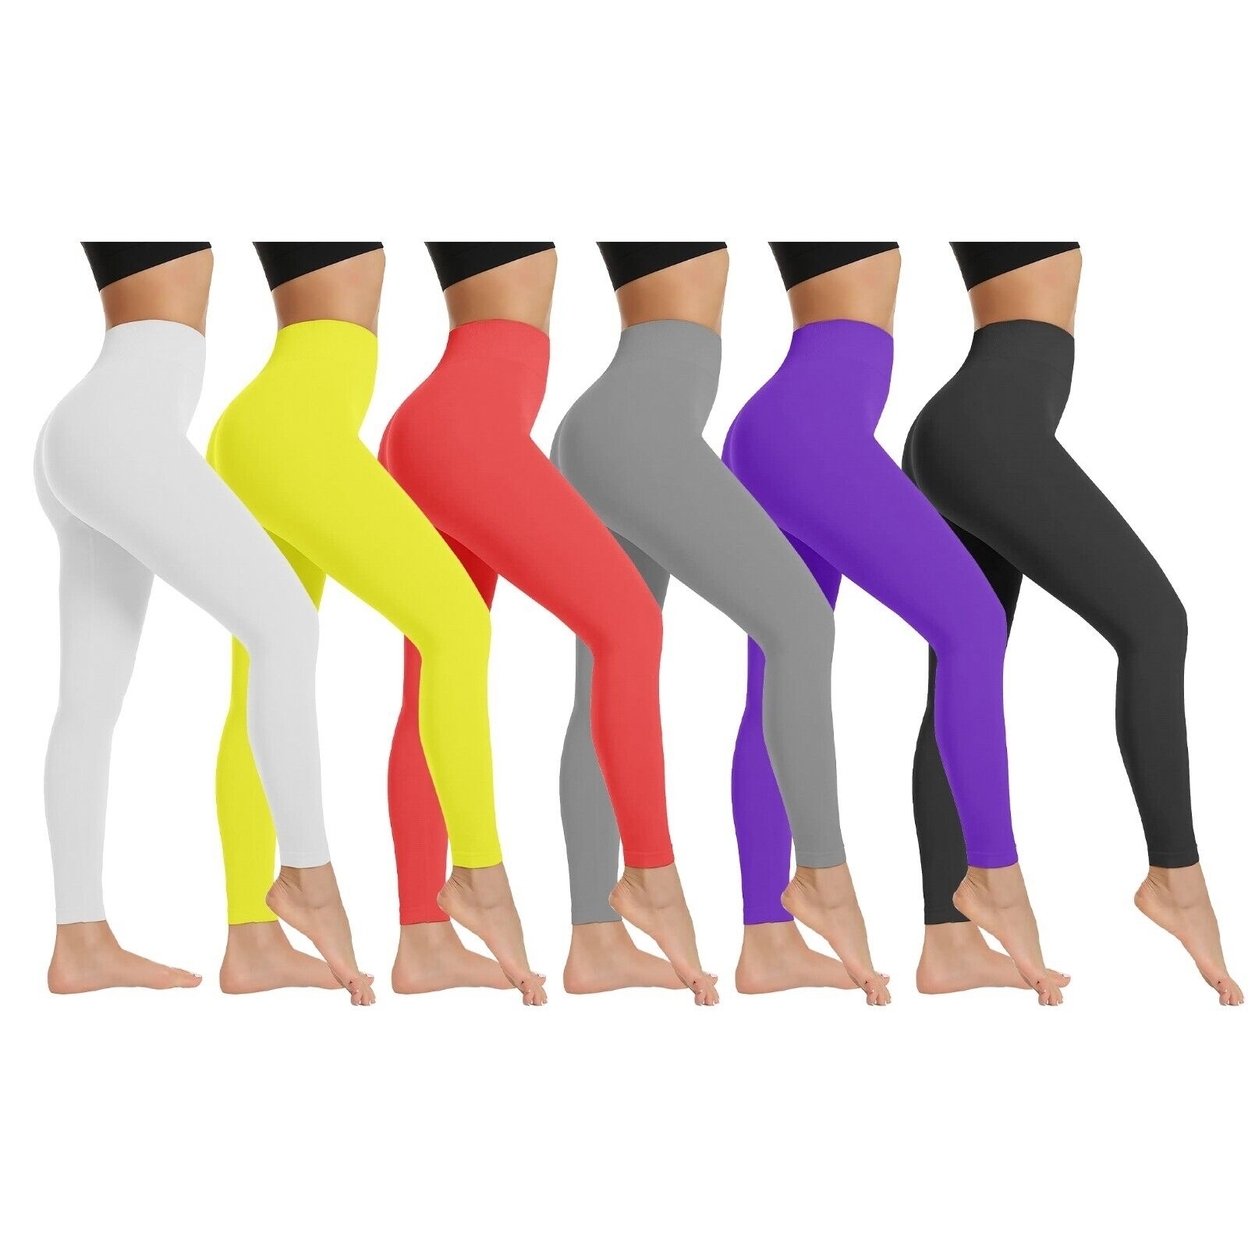 2-Pack: Women's High Waist Super Soft Active Athlete Stretch Yoga Cozy Leggings - Blue & Yellow, Small